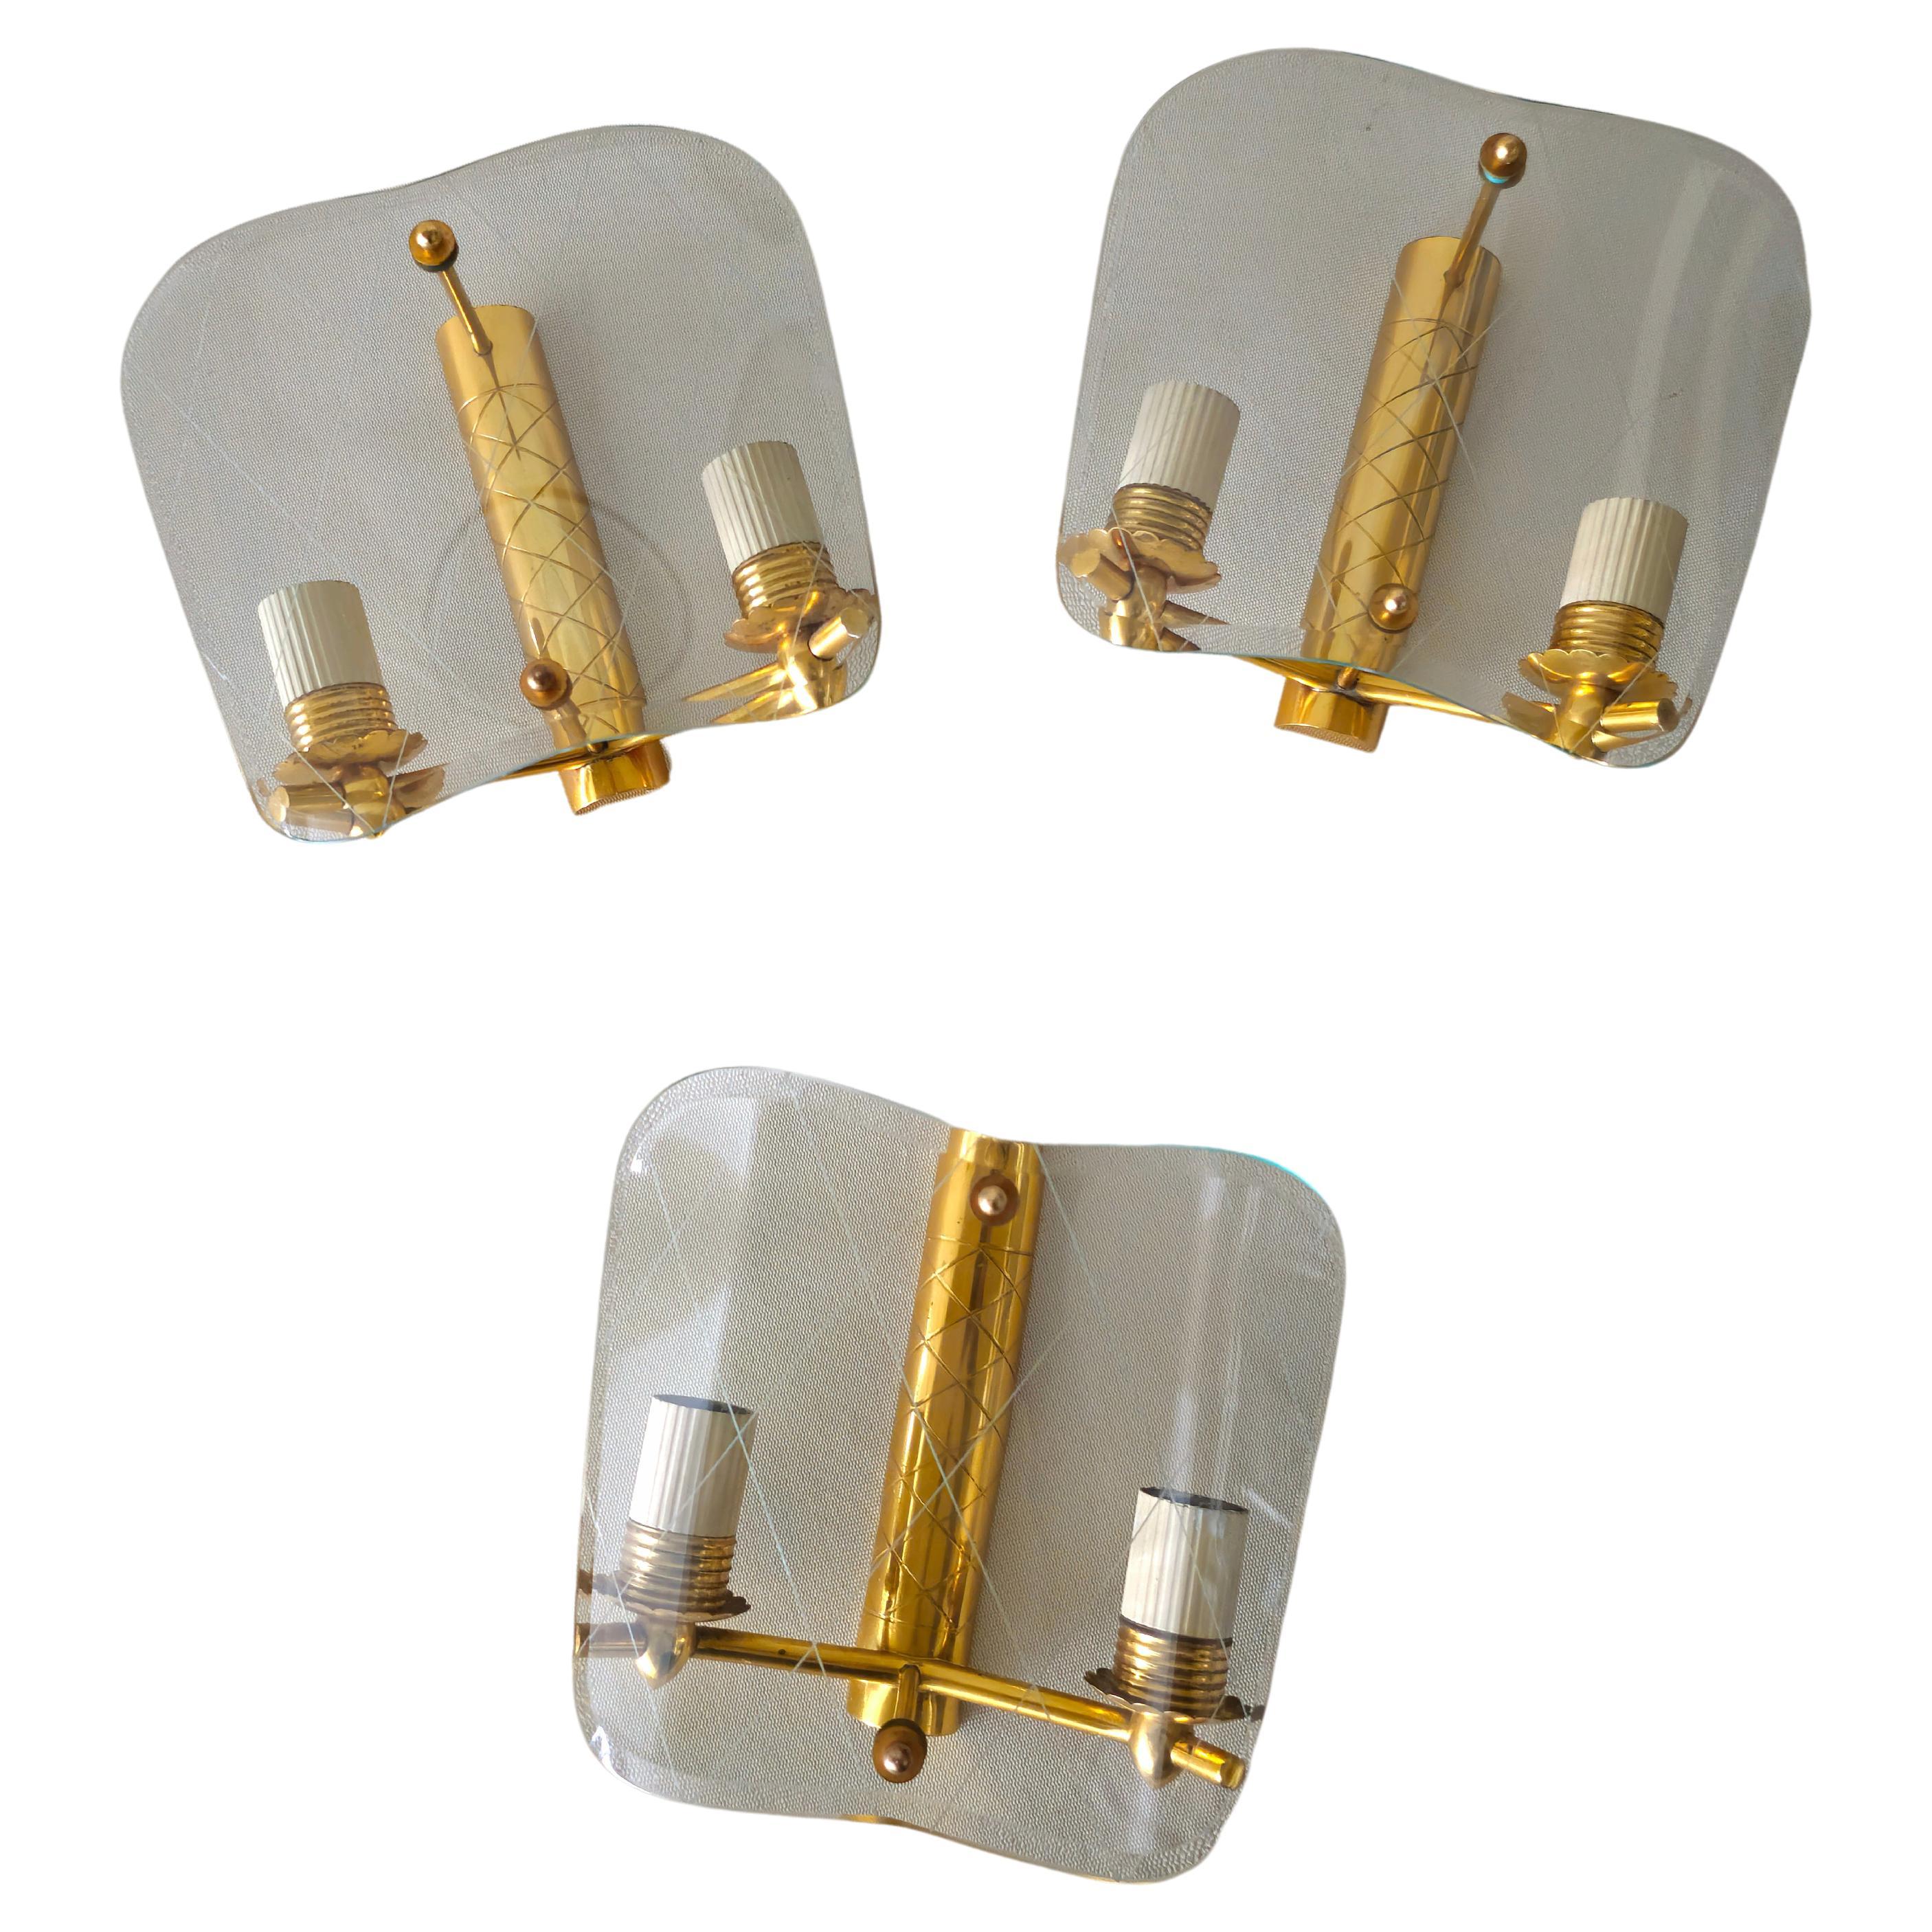 3 Wall Lights Sconces Brass Decorated Glass Midcentury Italian Design 1950 For Sale